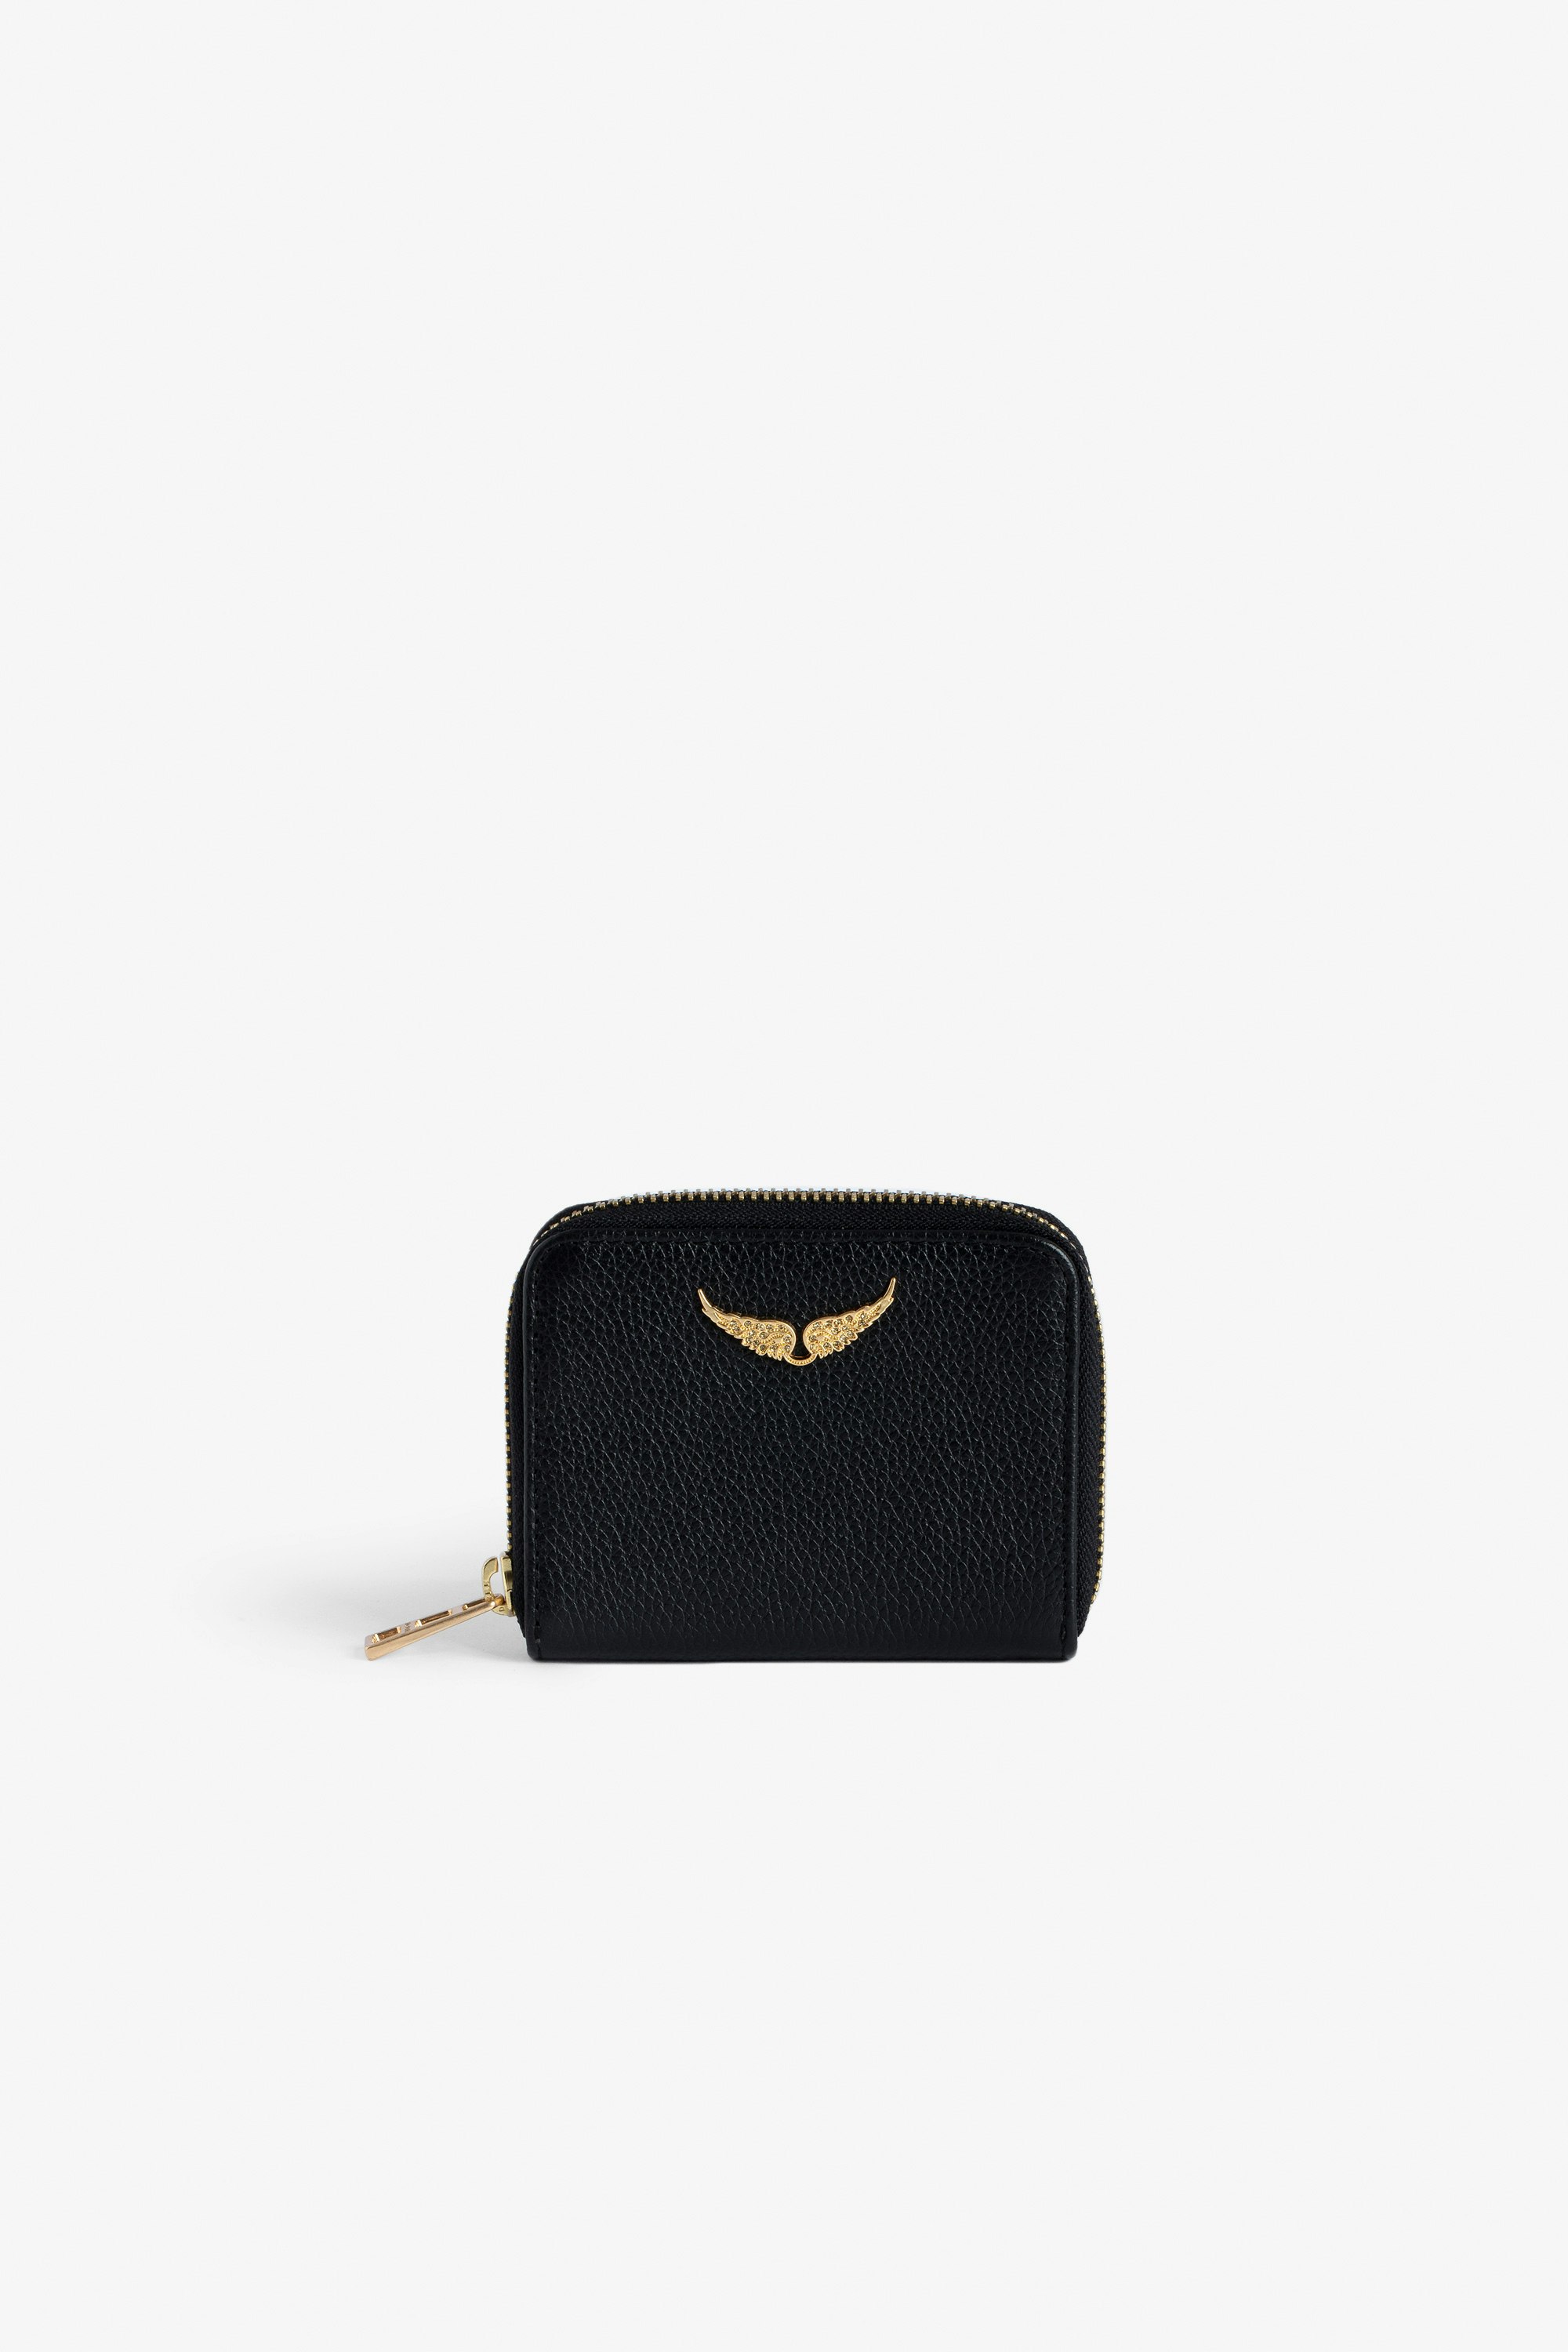 Mini ZV Coin 財布 Women’s black grained leather wallet with gold-tone diamanté wings charm.